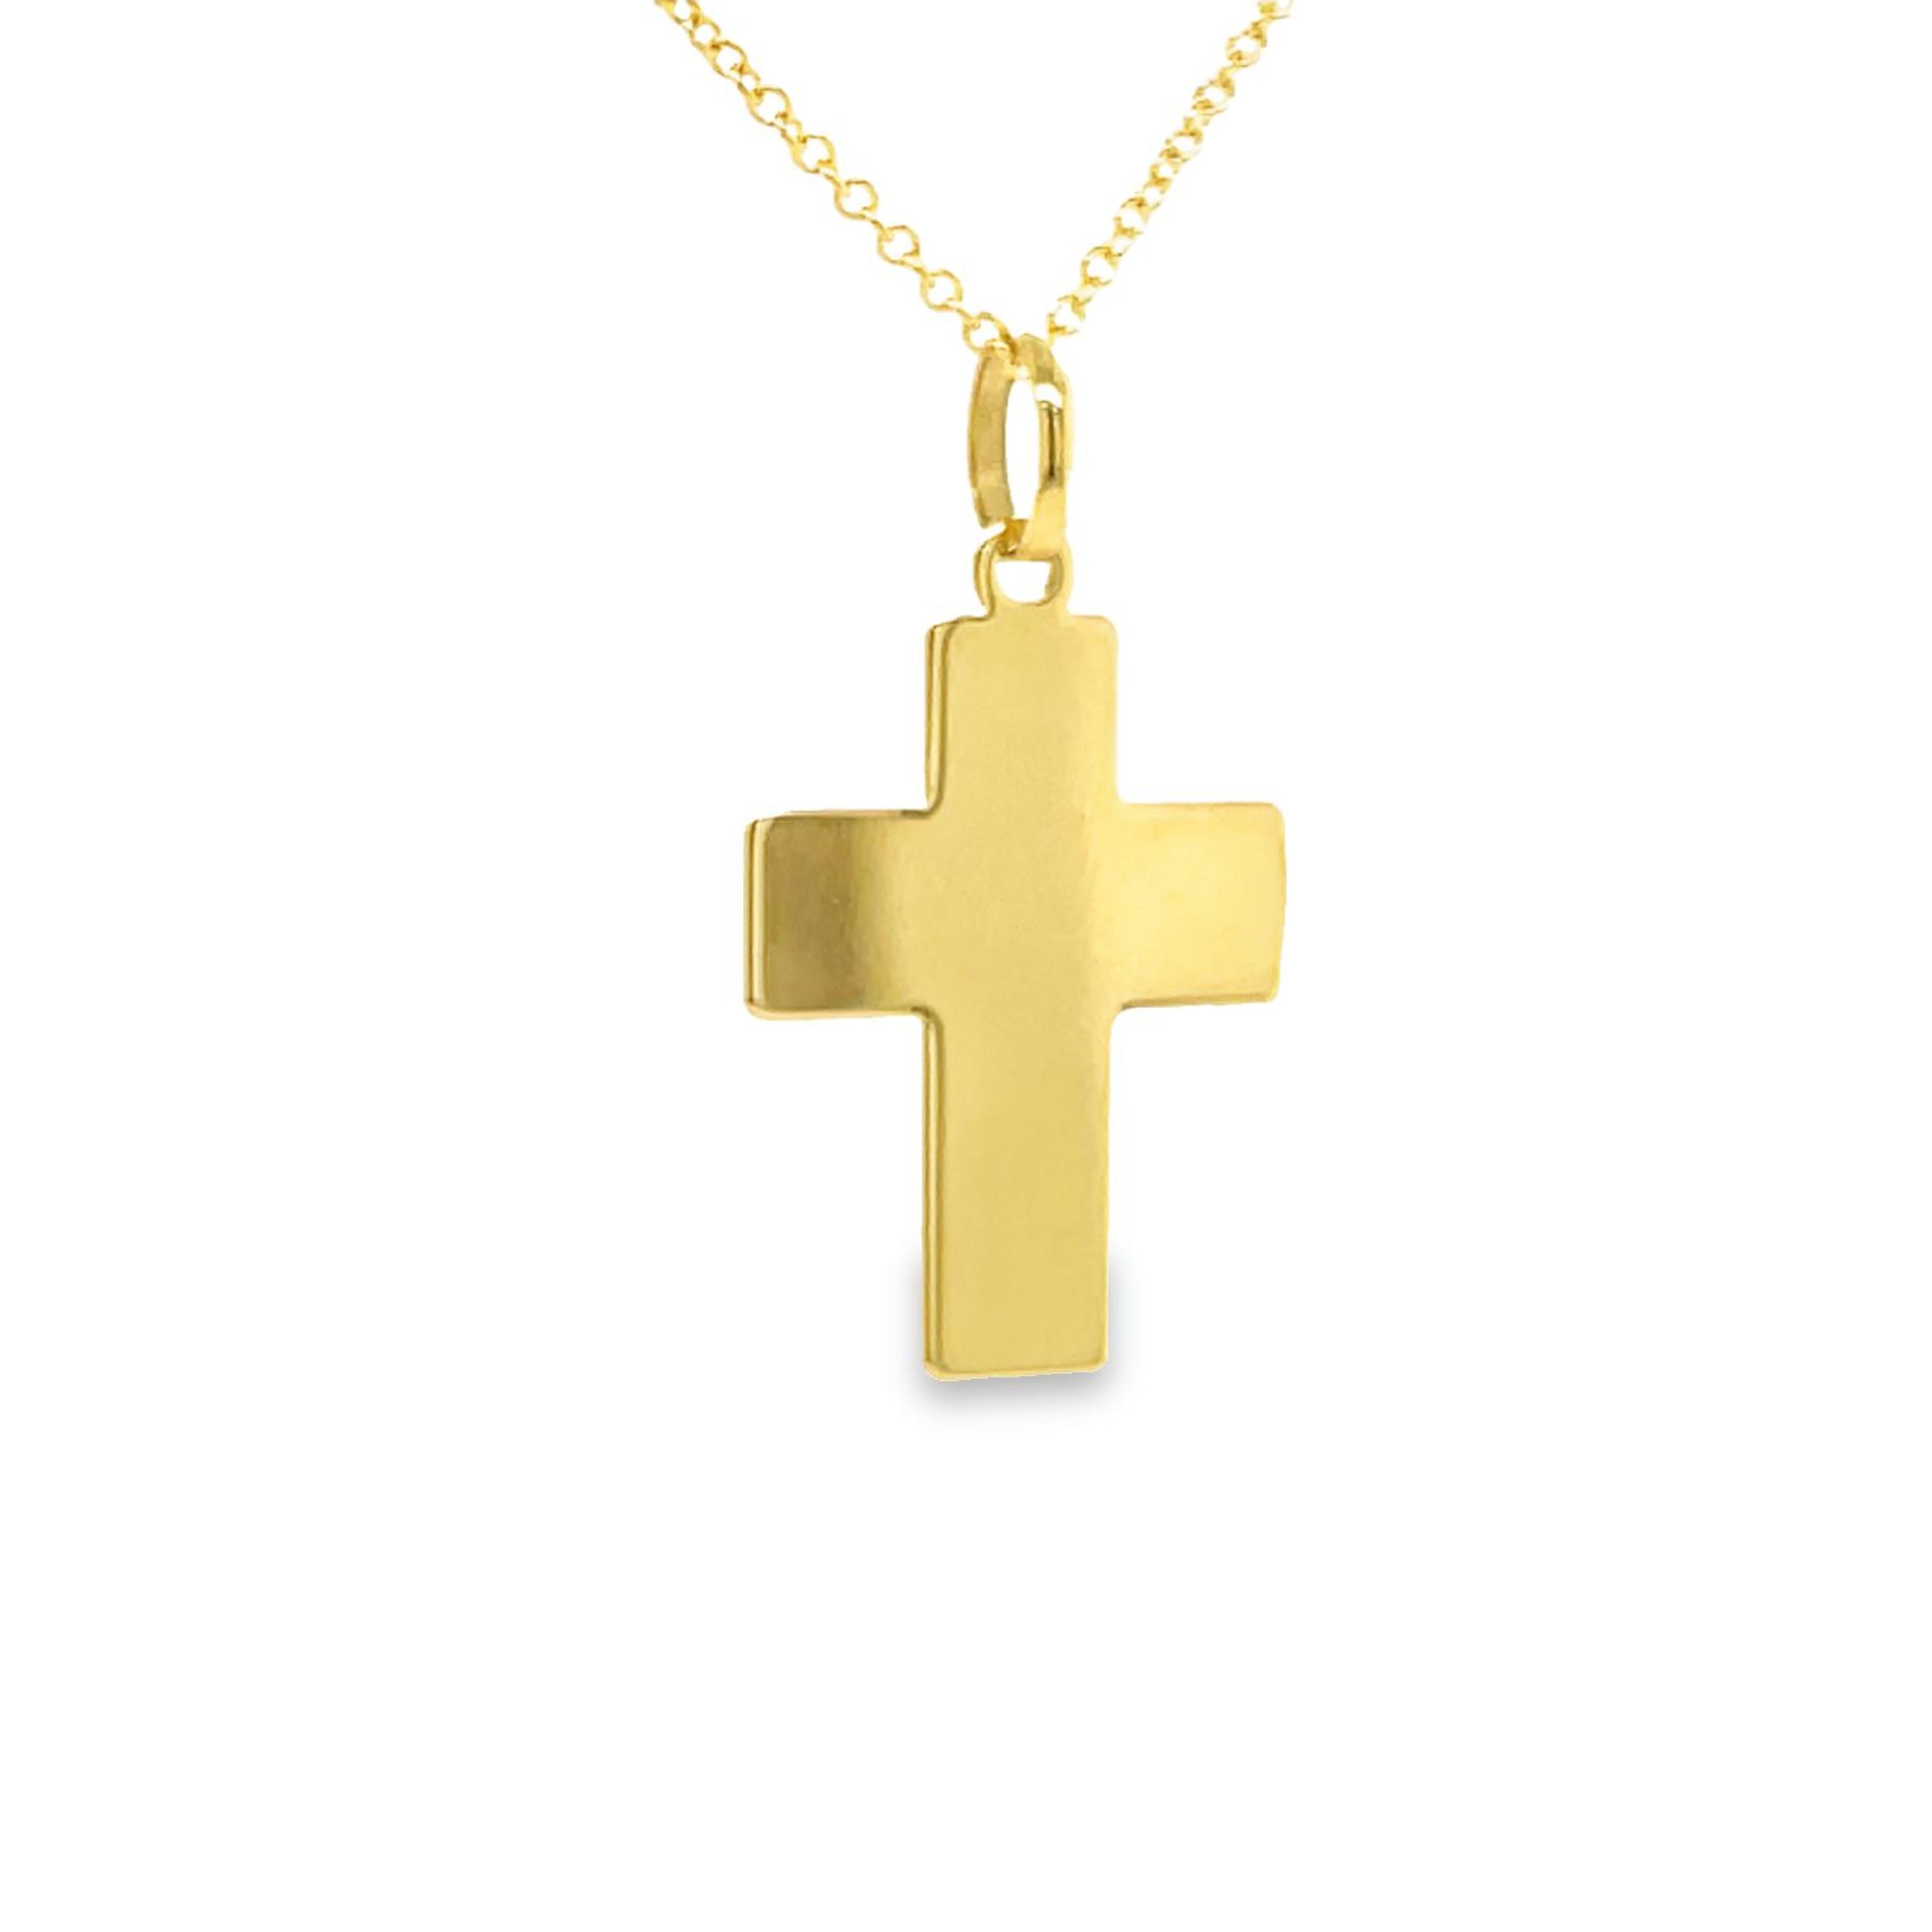 This 14k Italian yellow gold cross showcases the finest craftsmanship and durability with a flat design. The 18.00 x 14.00 mm size and 0.50 mm thickness create a resilient and eye-catching look, completed by a 5.50 mm bail for secure wear. Experience the timeless style and quality of this impressive piece for years ahead.